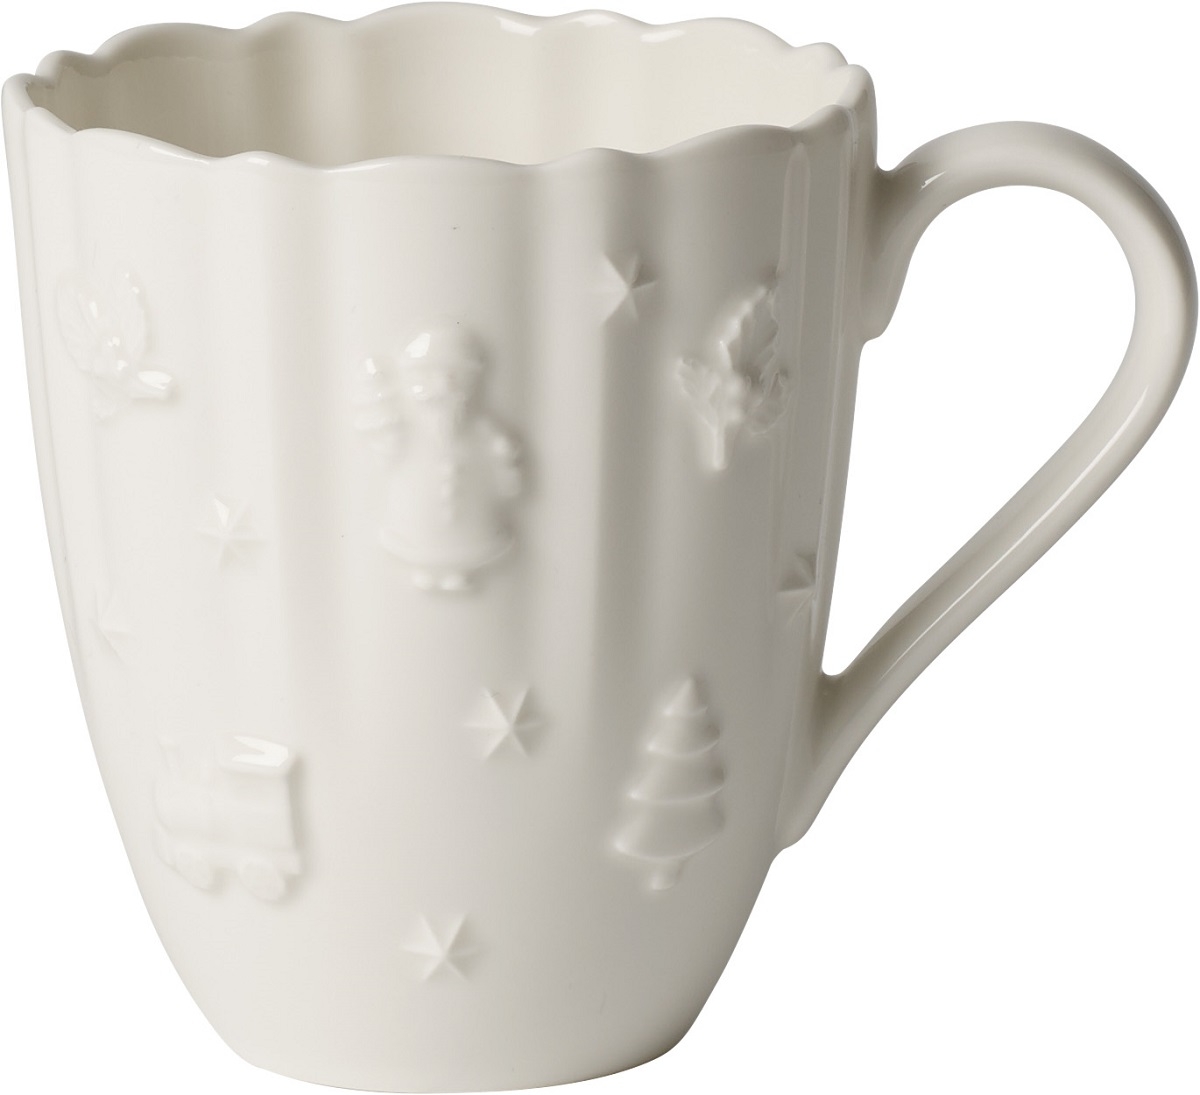 Cana Villeroy & Boch Toy's Delight Royal Classic 0.29 litri